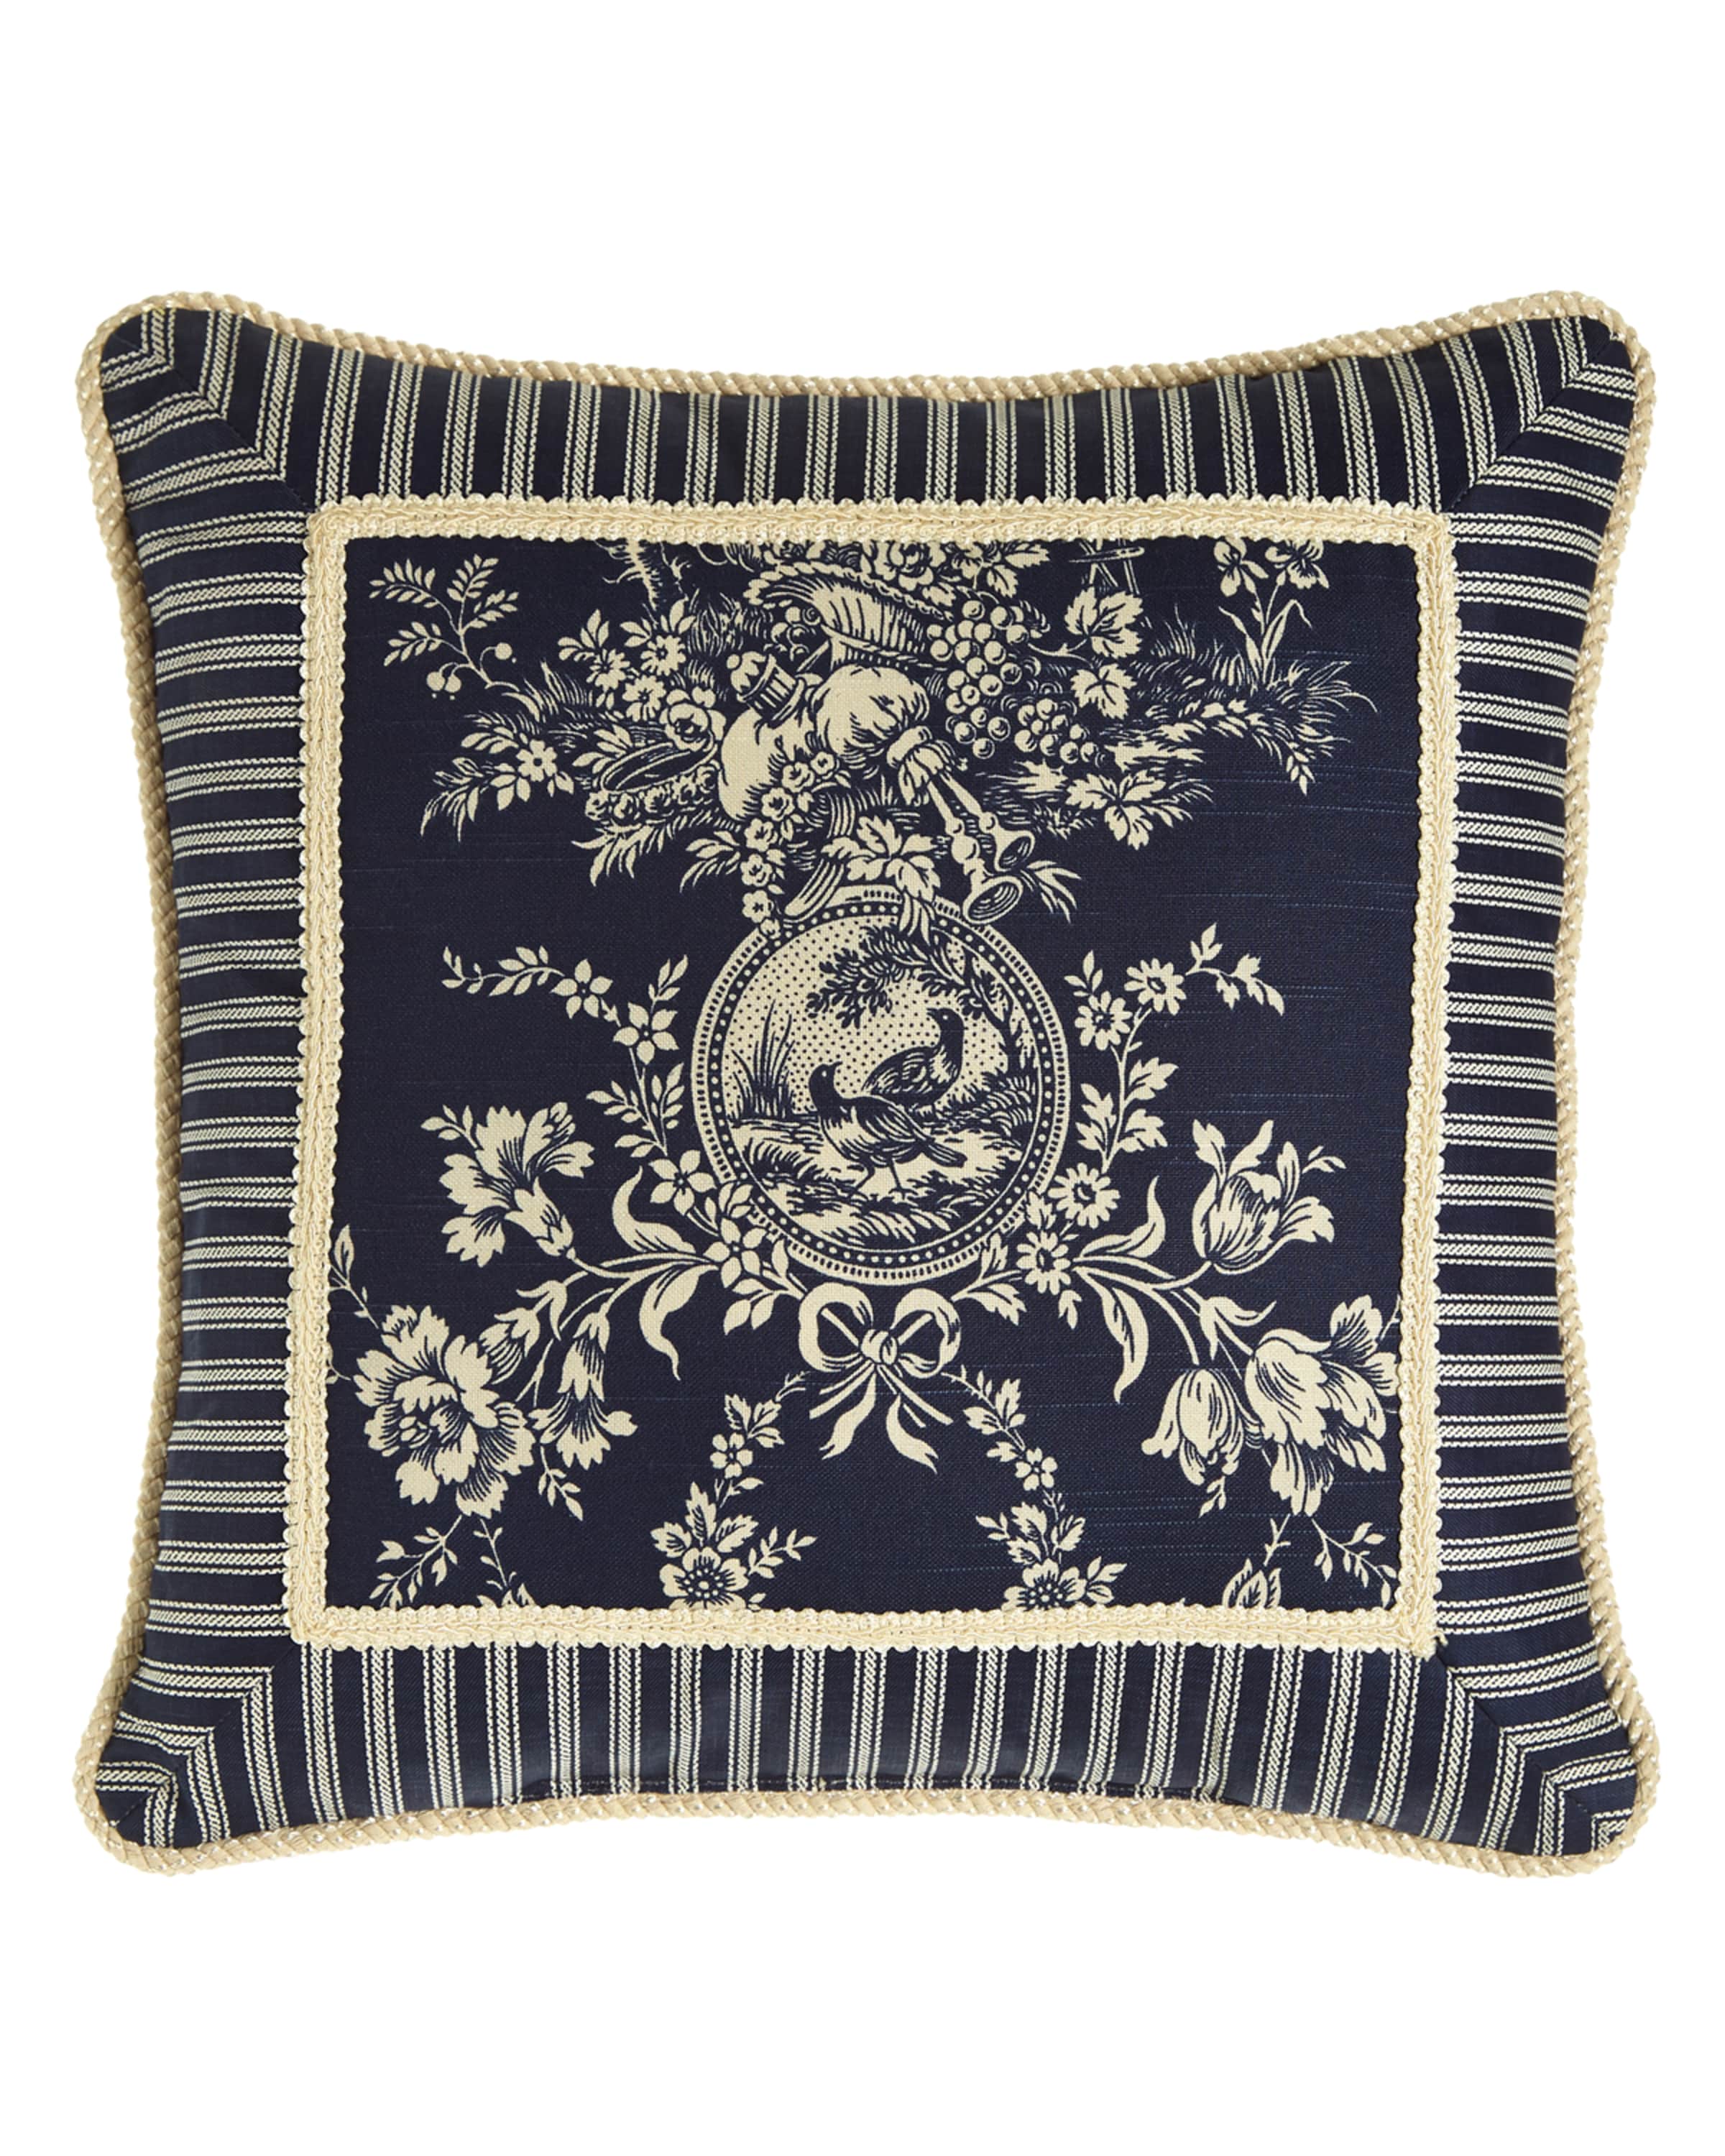 Sherry Kline Home Country Toile Pillow with Striped Frame, 19"Sq.